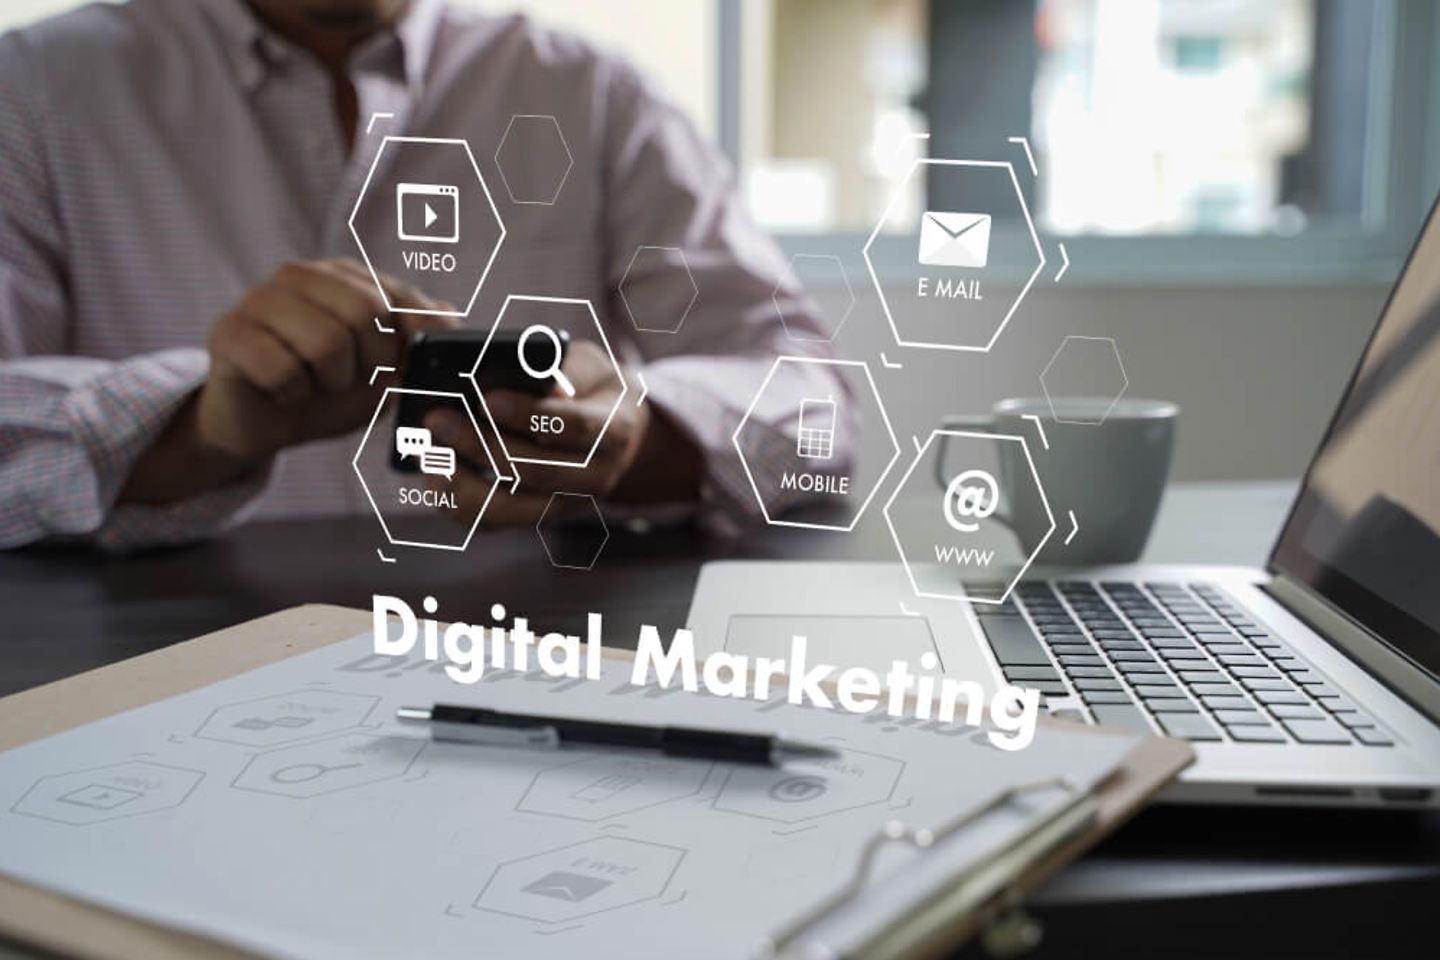 "Digital Marketing" in big white font with different icons around it. In the background: classic office setting 